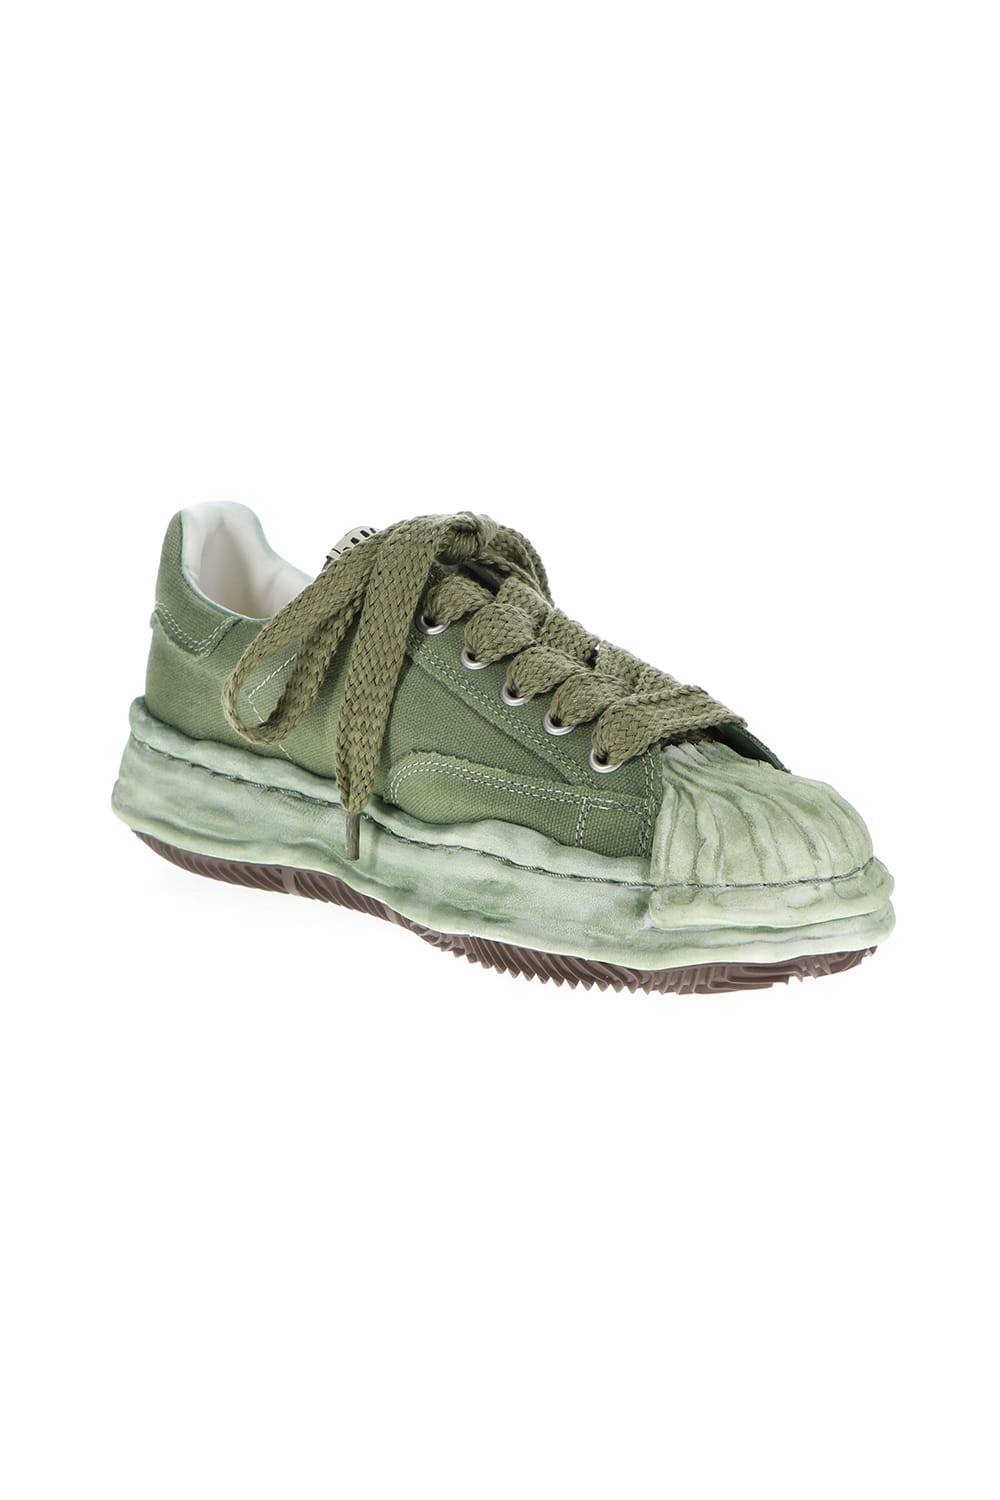 -BLAKEY Low- Original STC sole over dyed canvas Low-Top sneakers Green